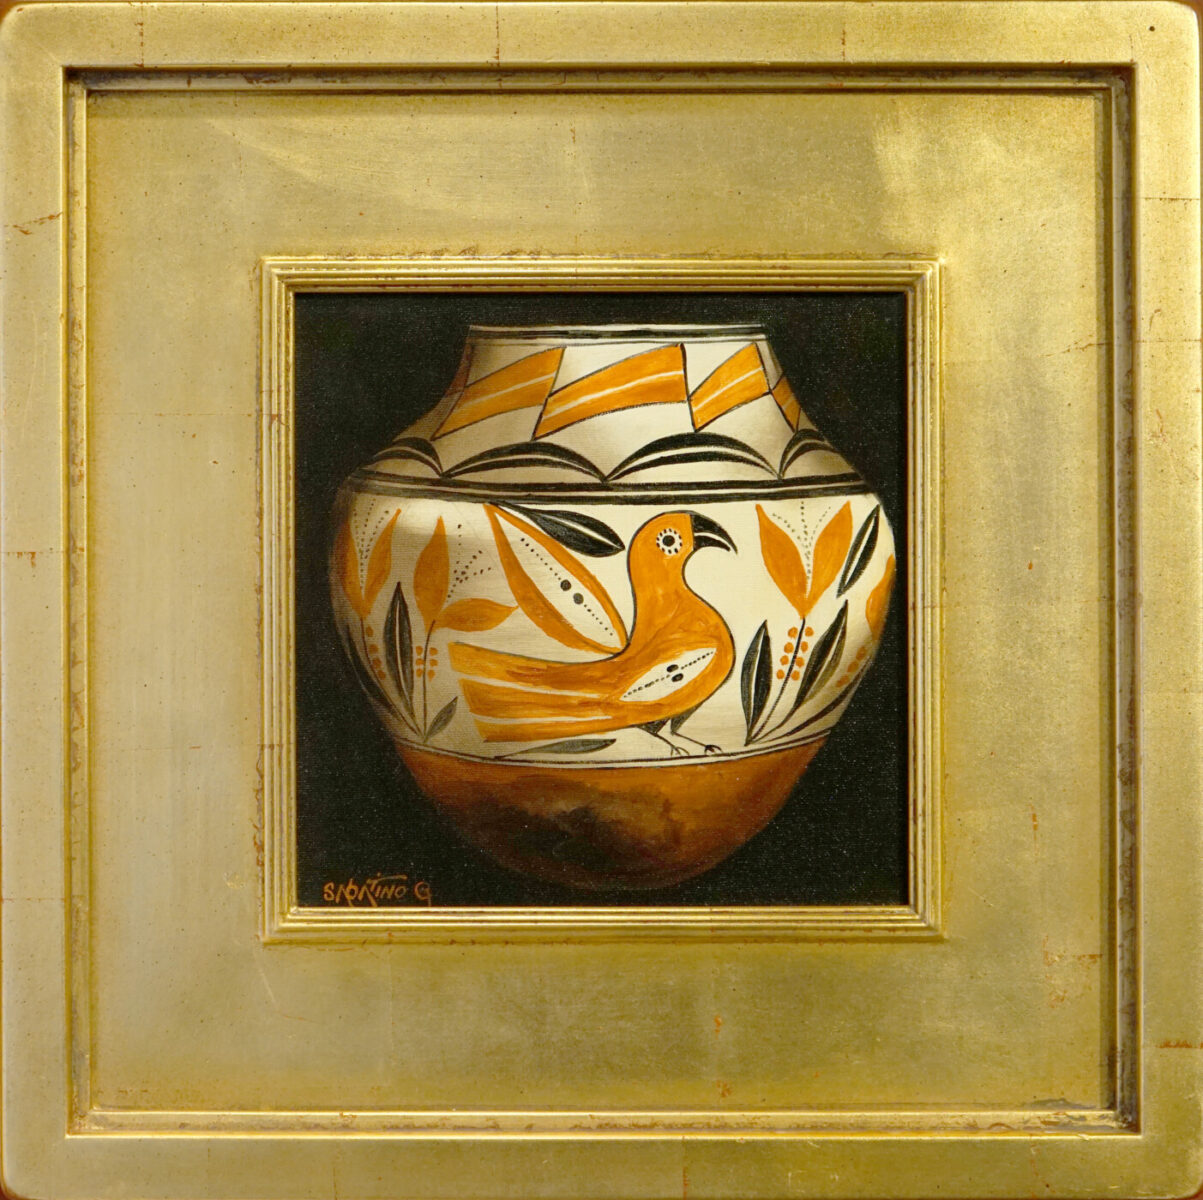 Oil painting of native american pottery by Chuck Sabatino